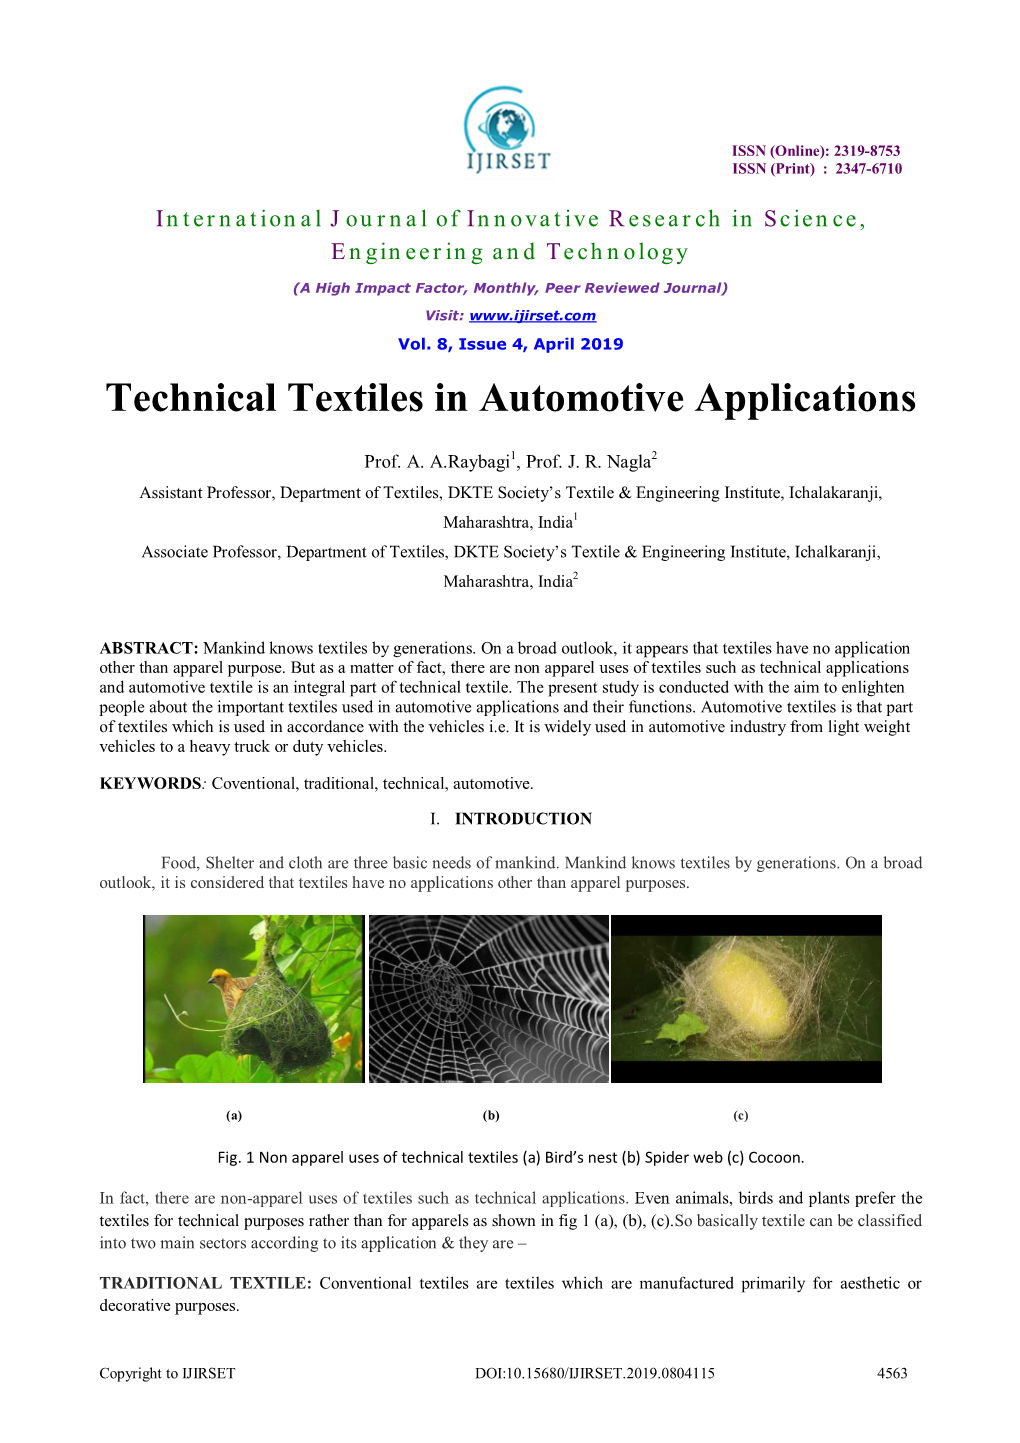 Technical Textiles in Automotive Applications